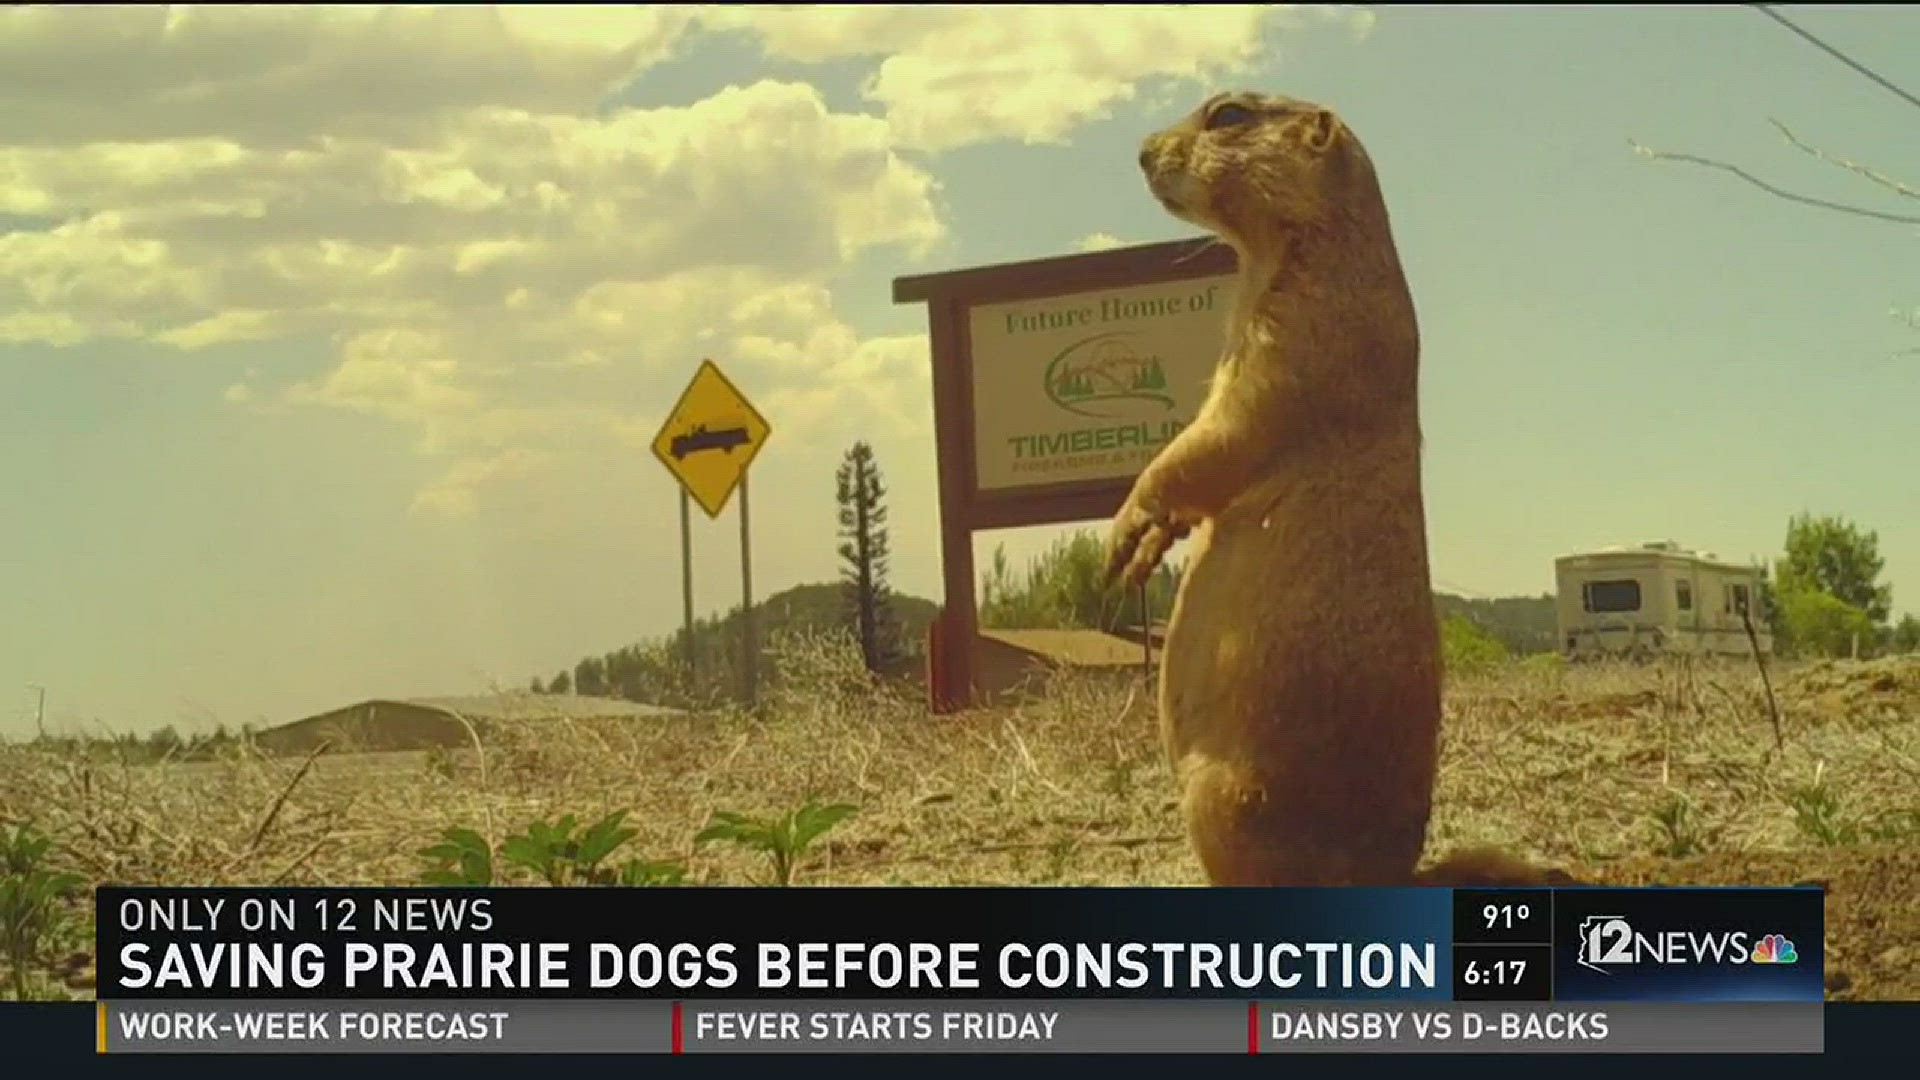 Reestablishing prairie dogs colonies to a new location